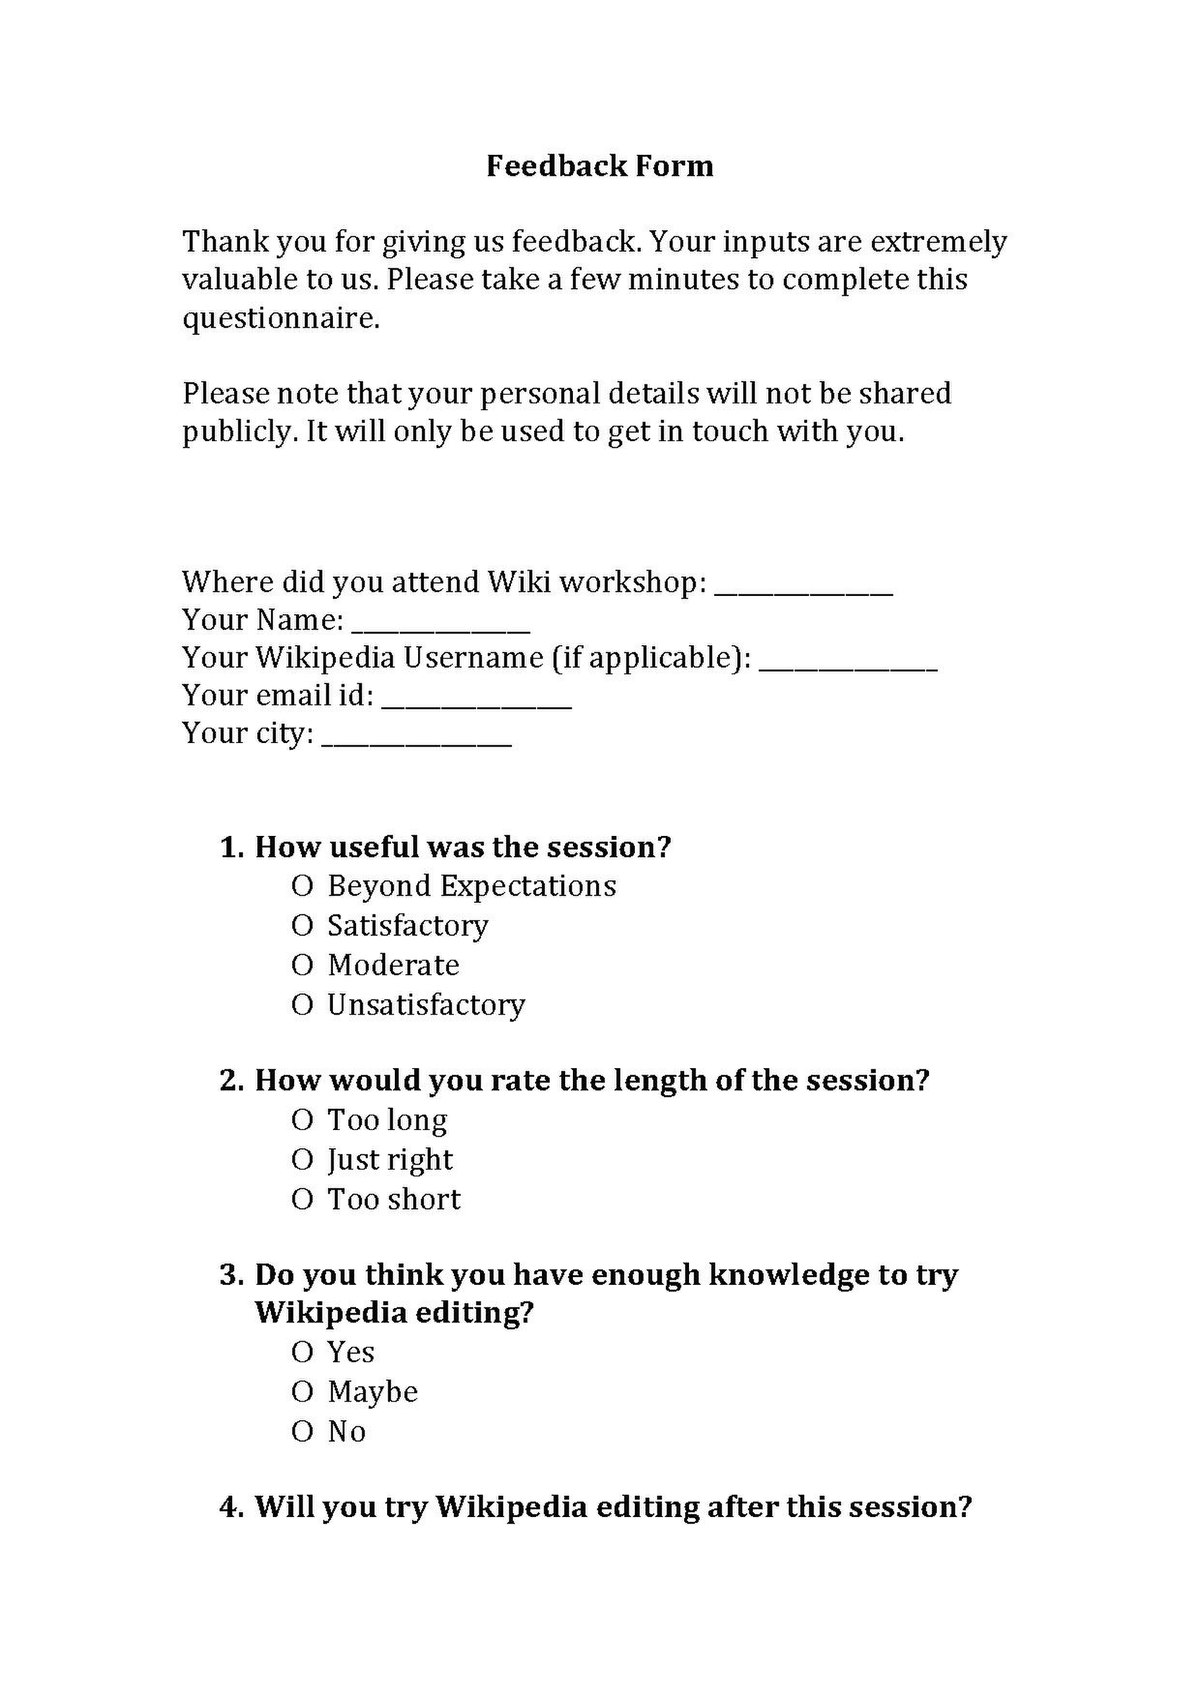 Thank you note with feedback form